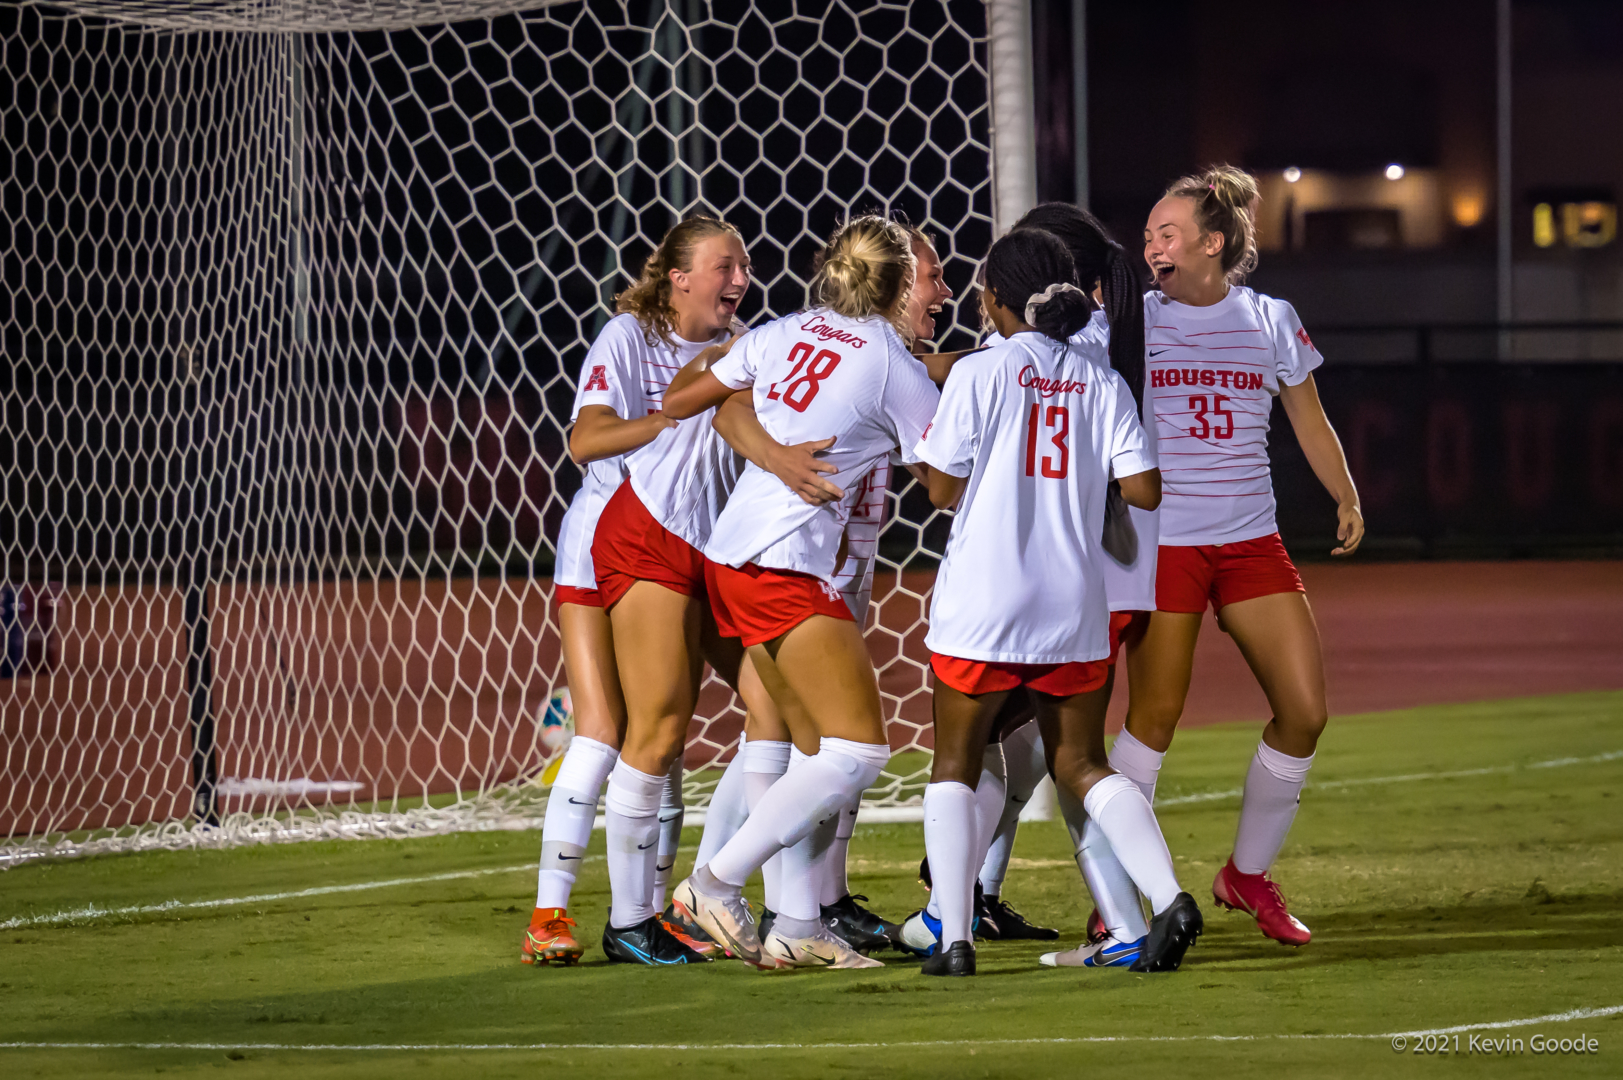 UH soccer won its senior night game in style, defeating Arkansas Pine Bluff 8-1. | Courtesy of UH athletics